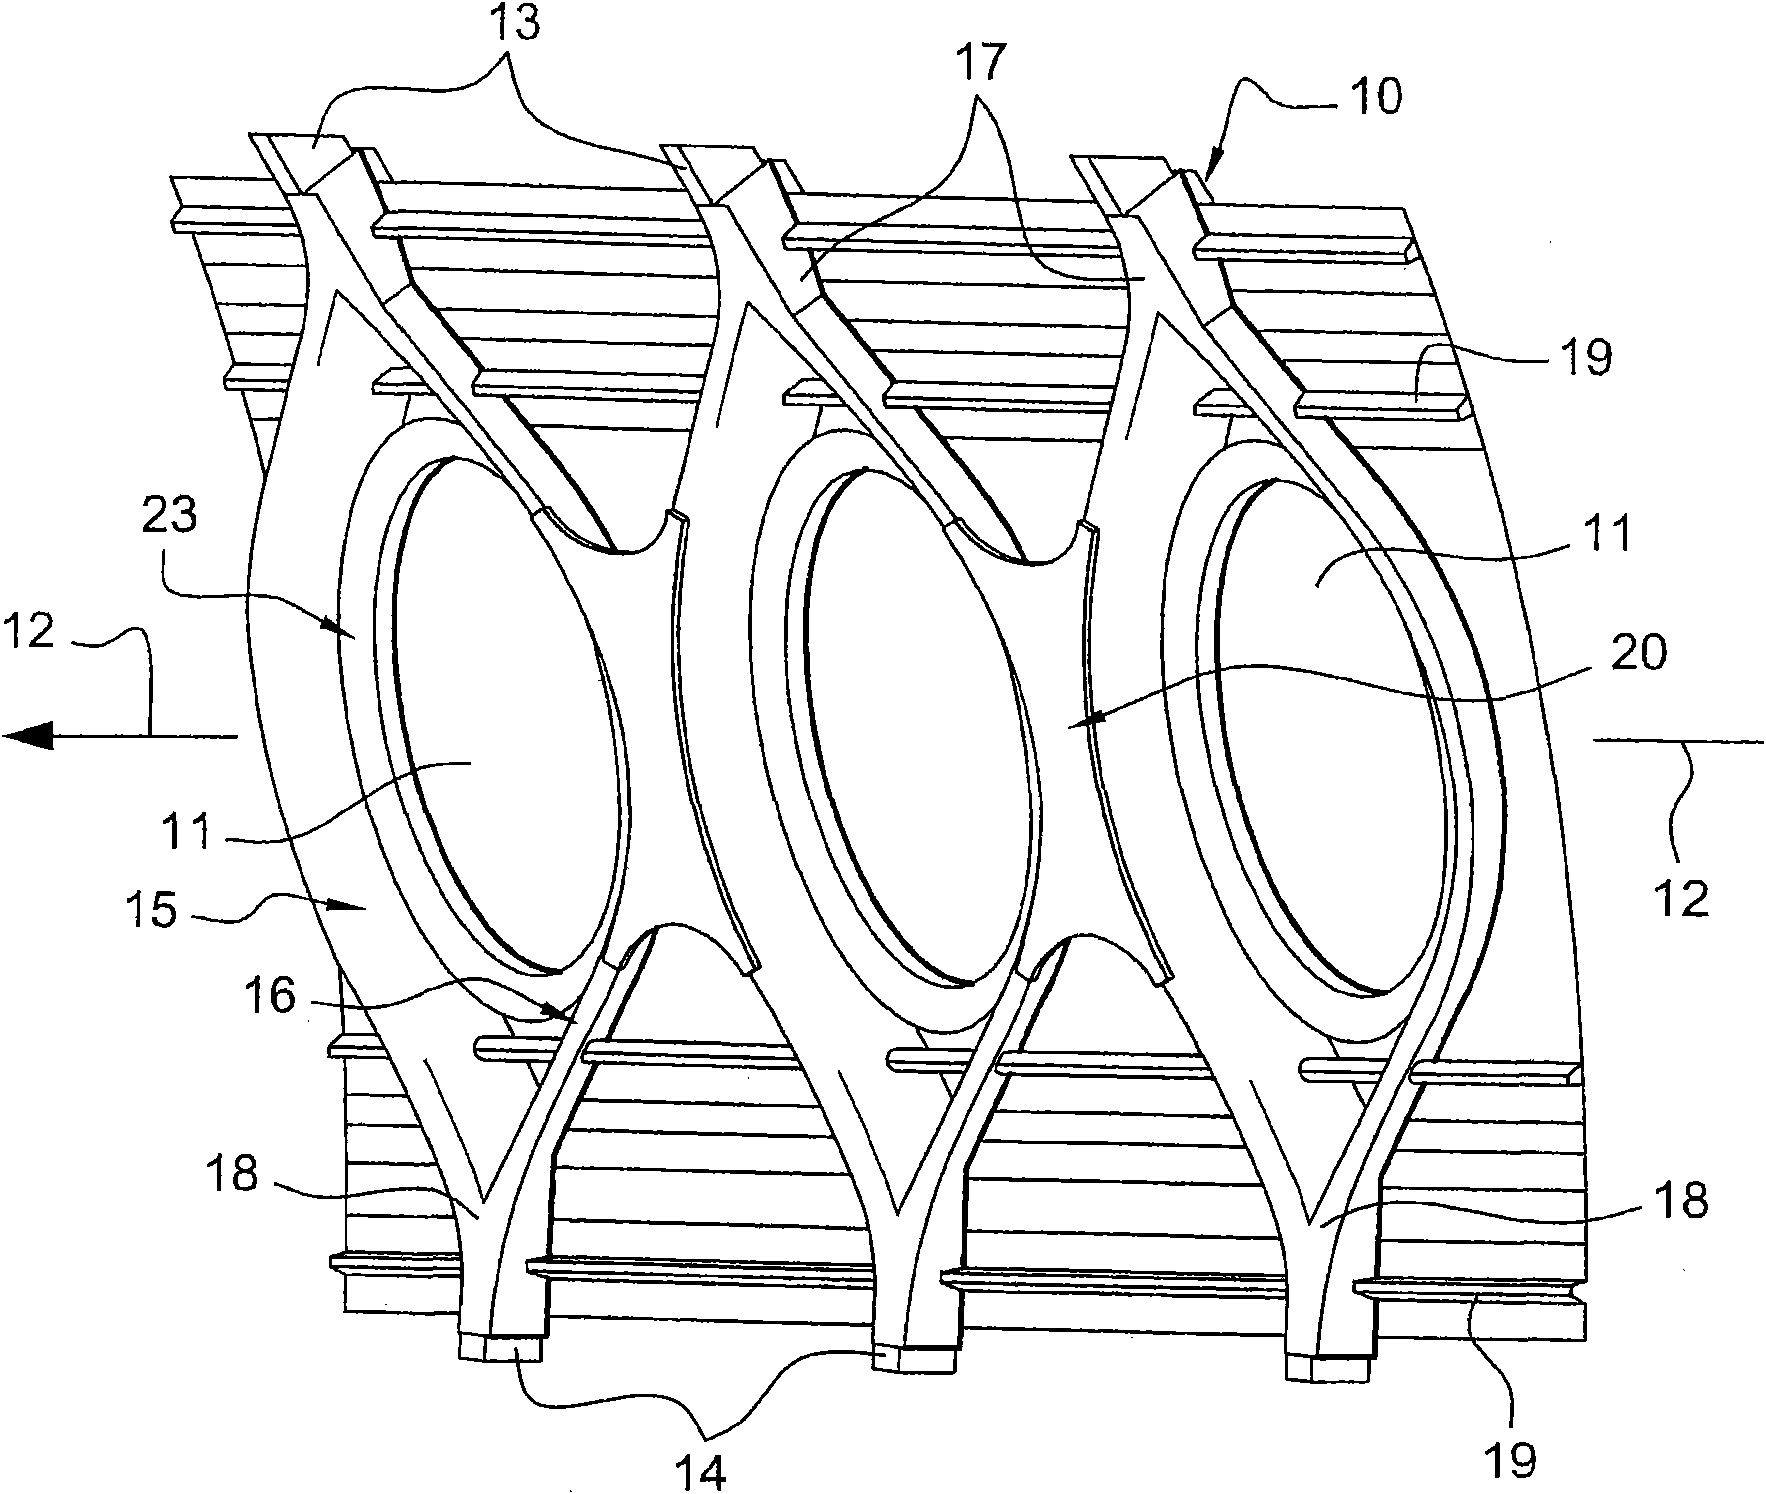 Section of aircraft fuselage and aircraft including one such section